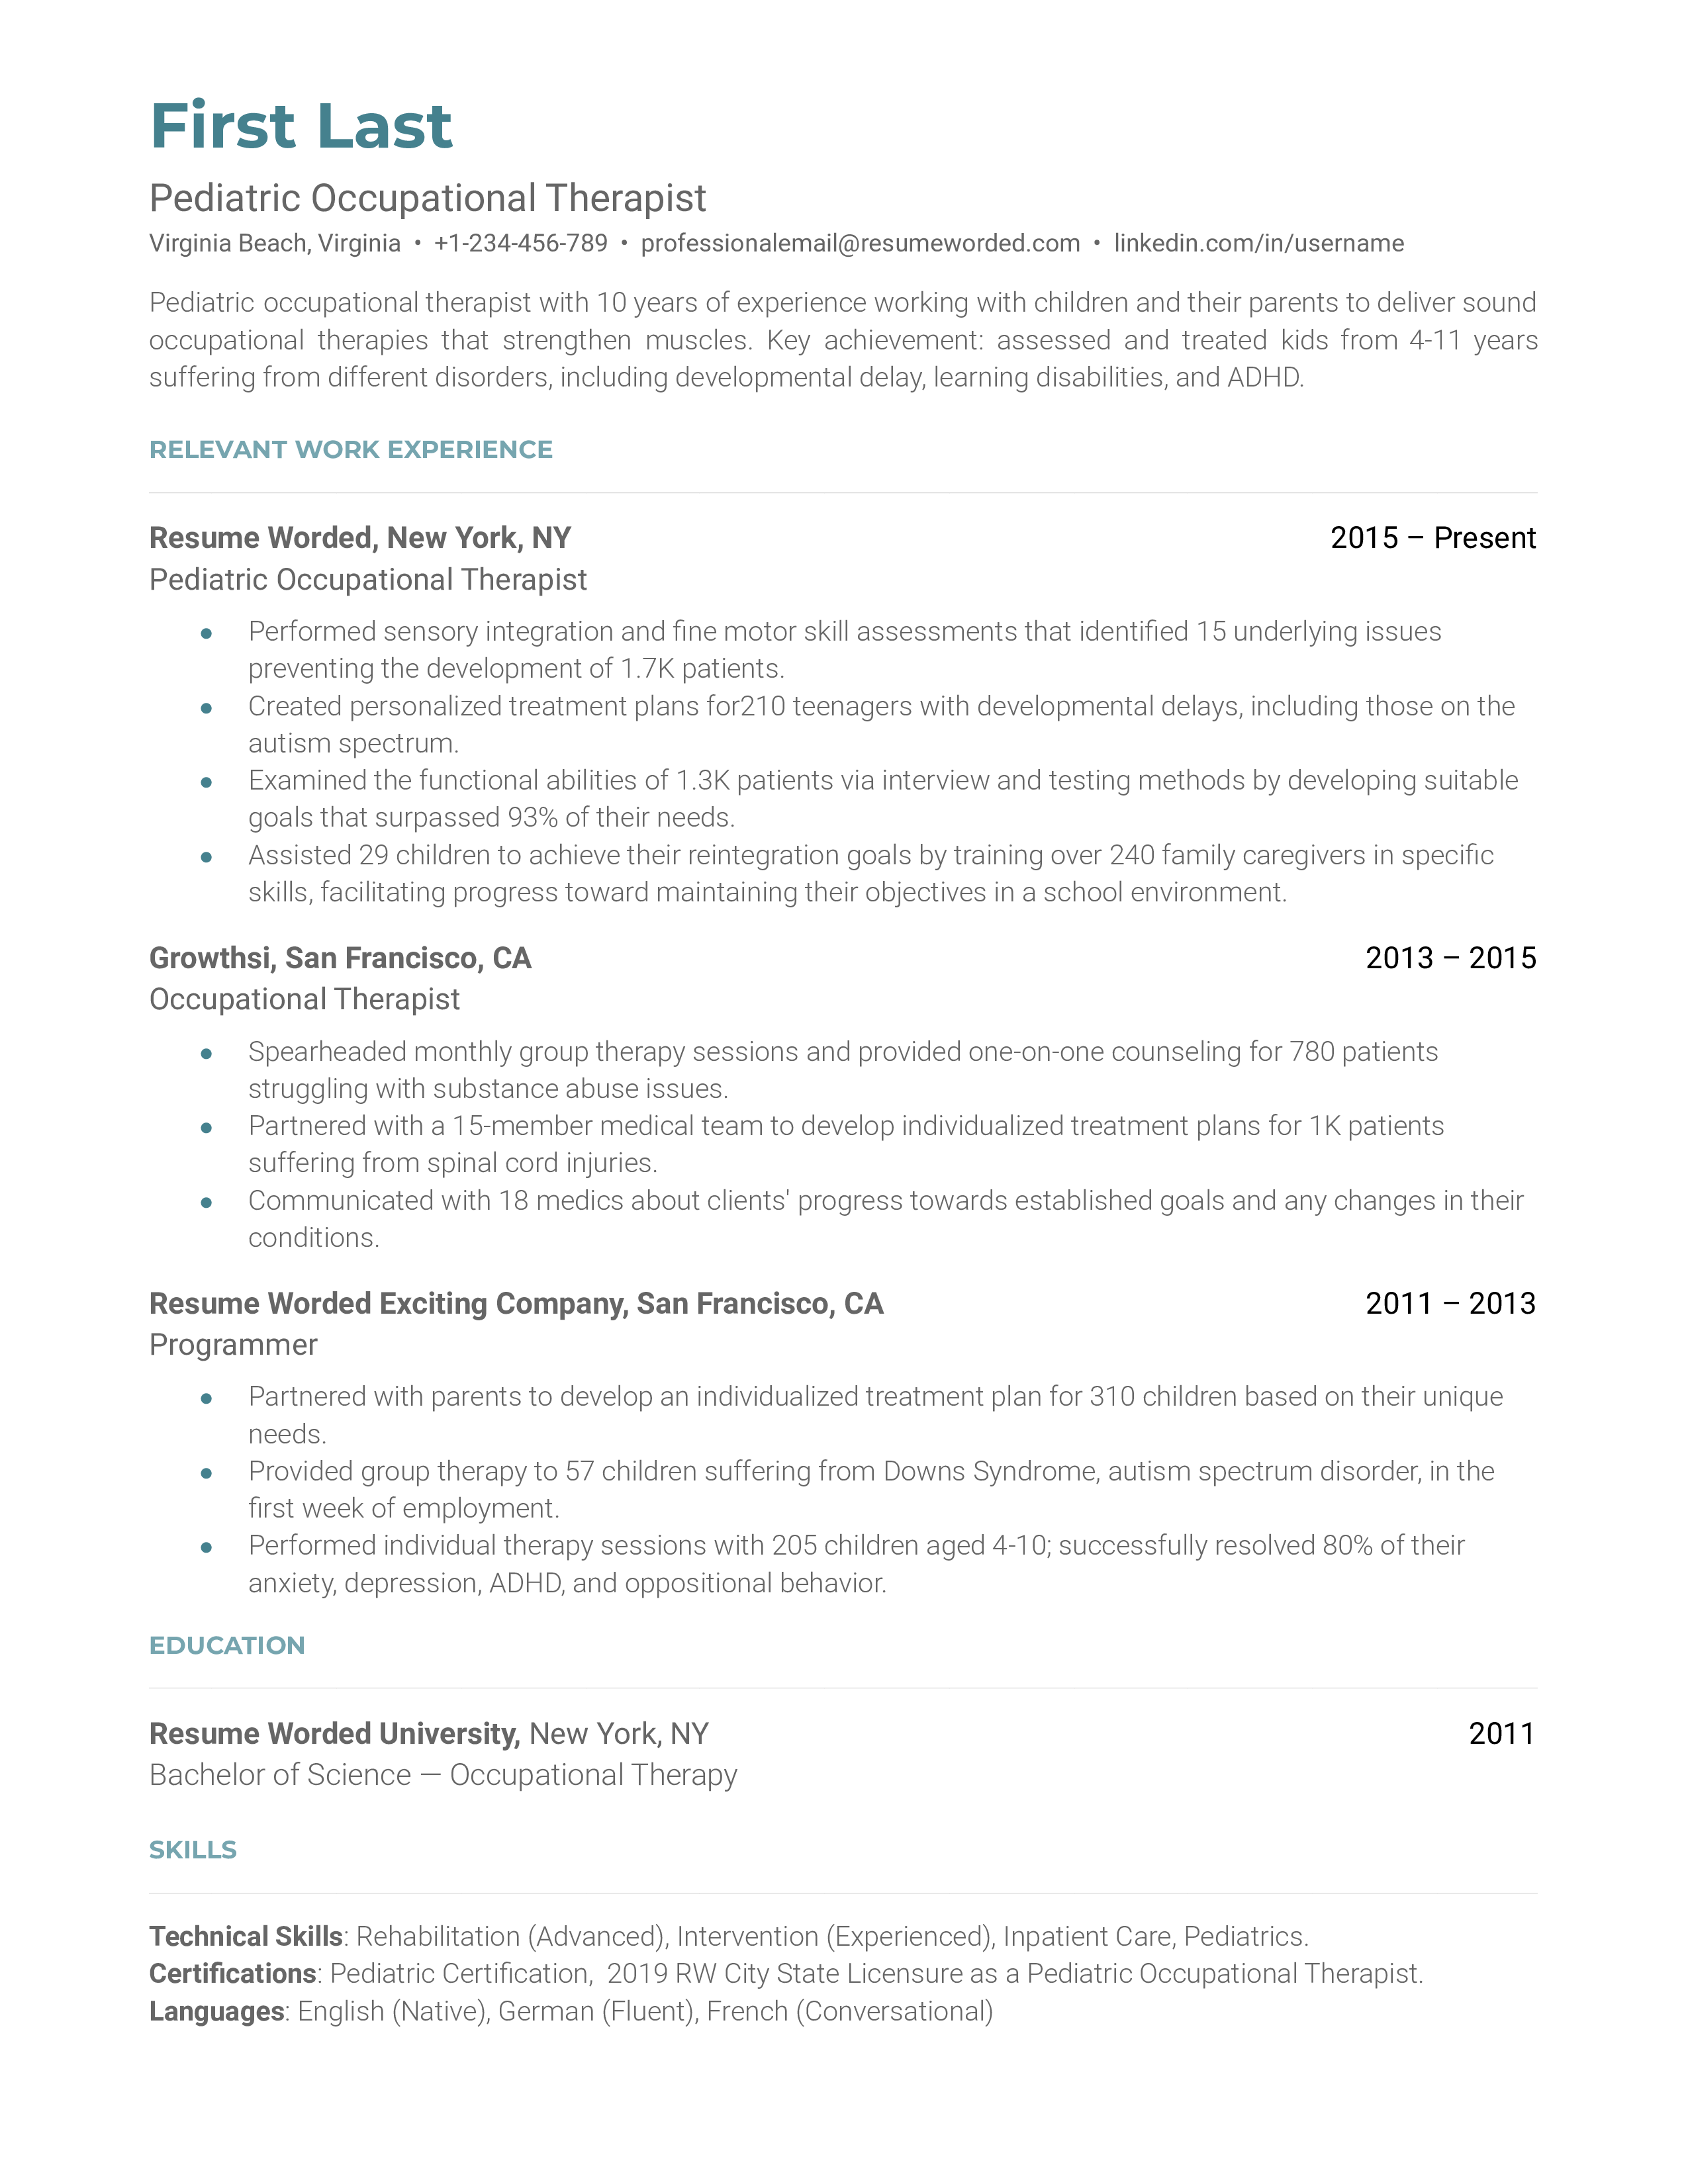 A pediatric occupational therapist resume sample that highlights the applicant’s key achievements and extensive experience.